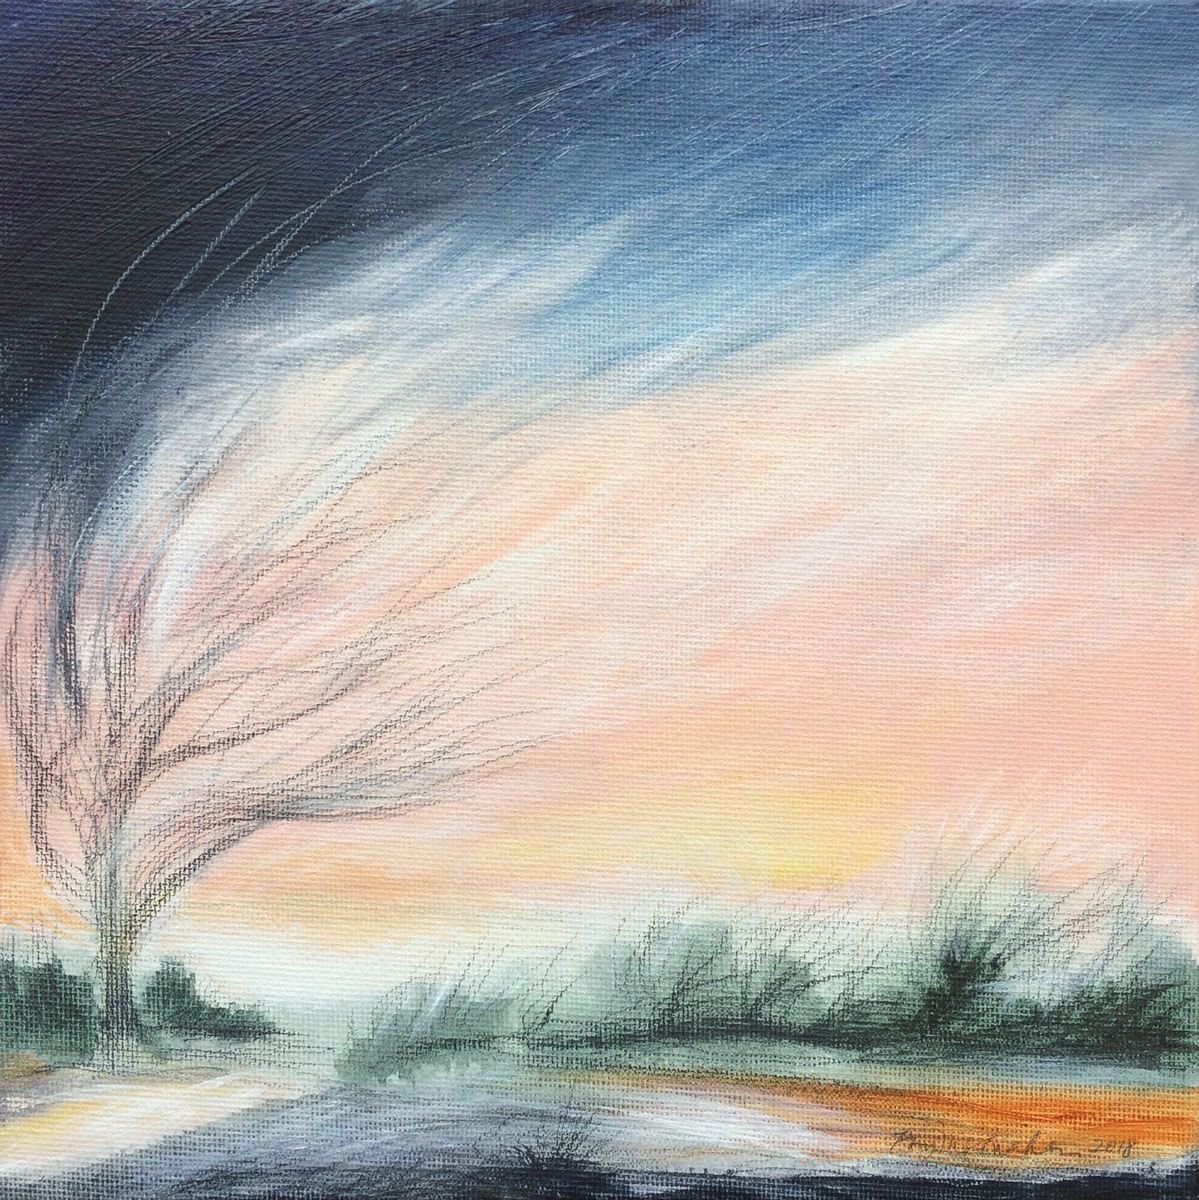 Sky and Land - Winter Tree (ready to hang) by Phyllis Mahon